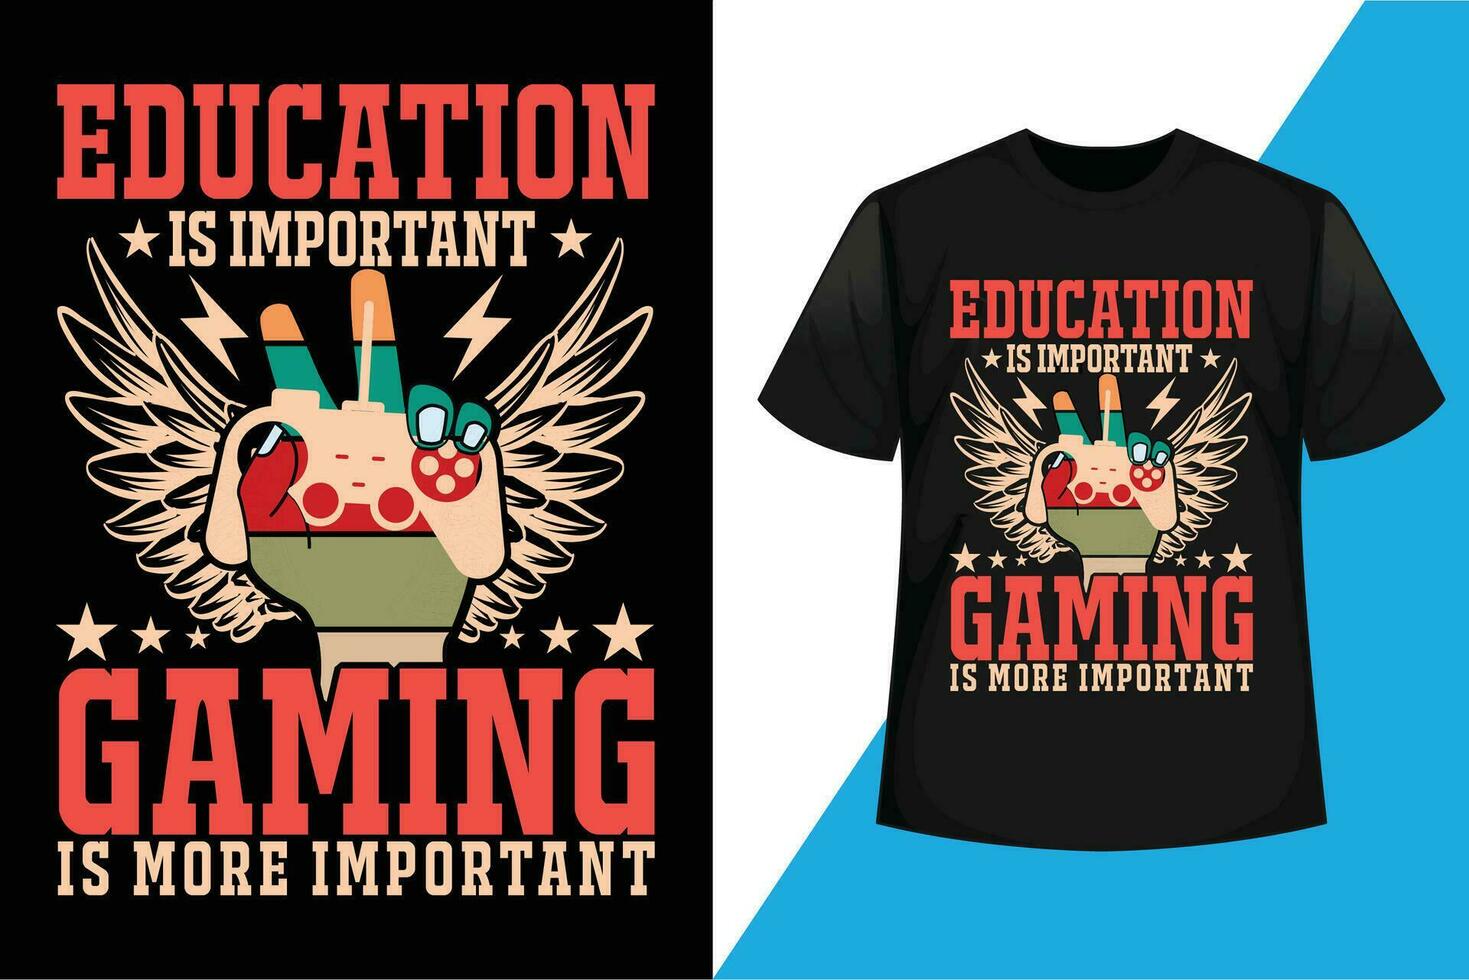 Education is important Gaming is more important, Gaming T shirts design vector